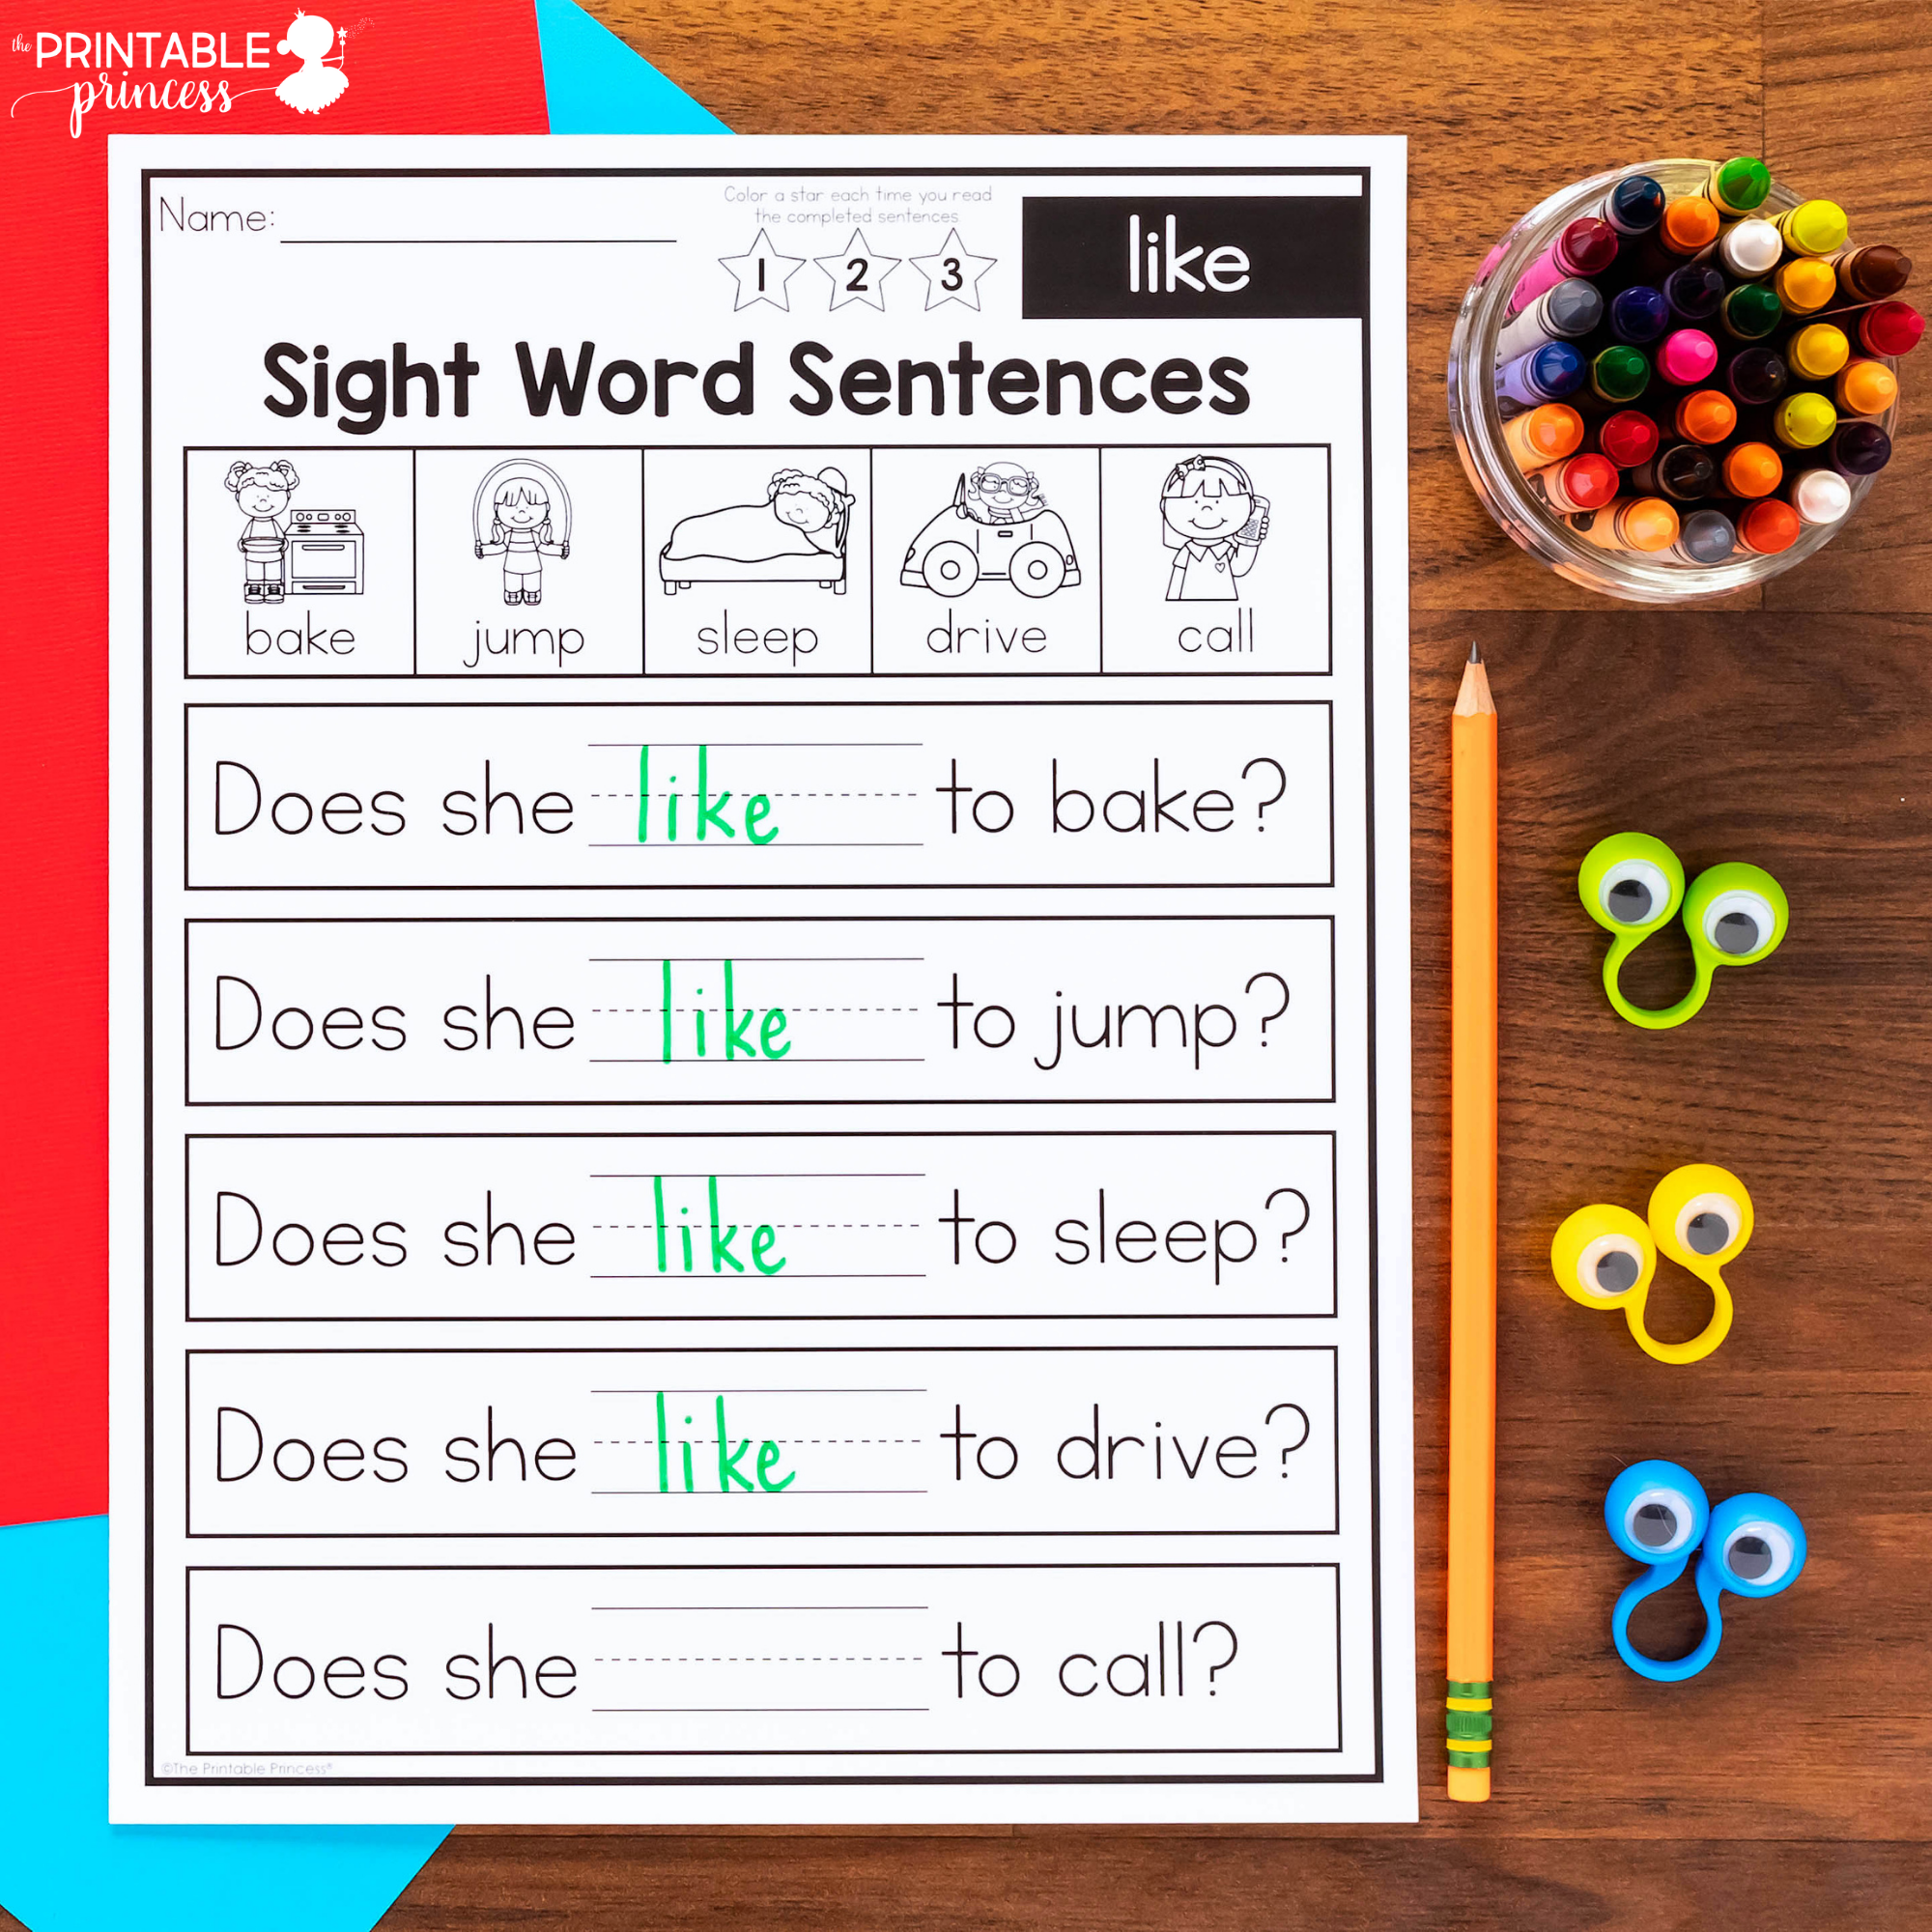 Fill in the Blank Sight Word Sentences  Set 22 - The Printable Inside 2nd Grade Sight Words Worksheet